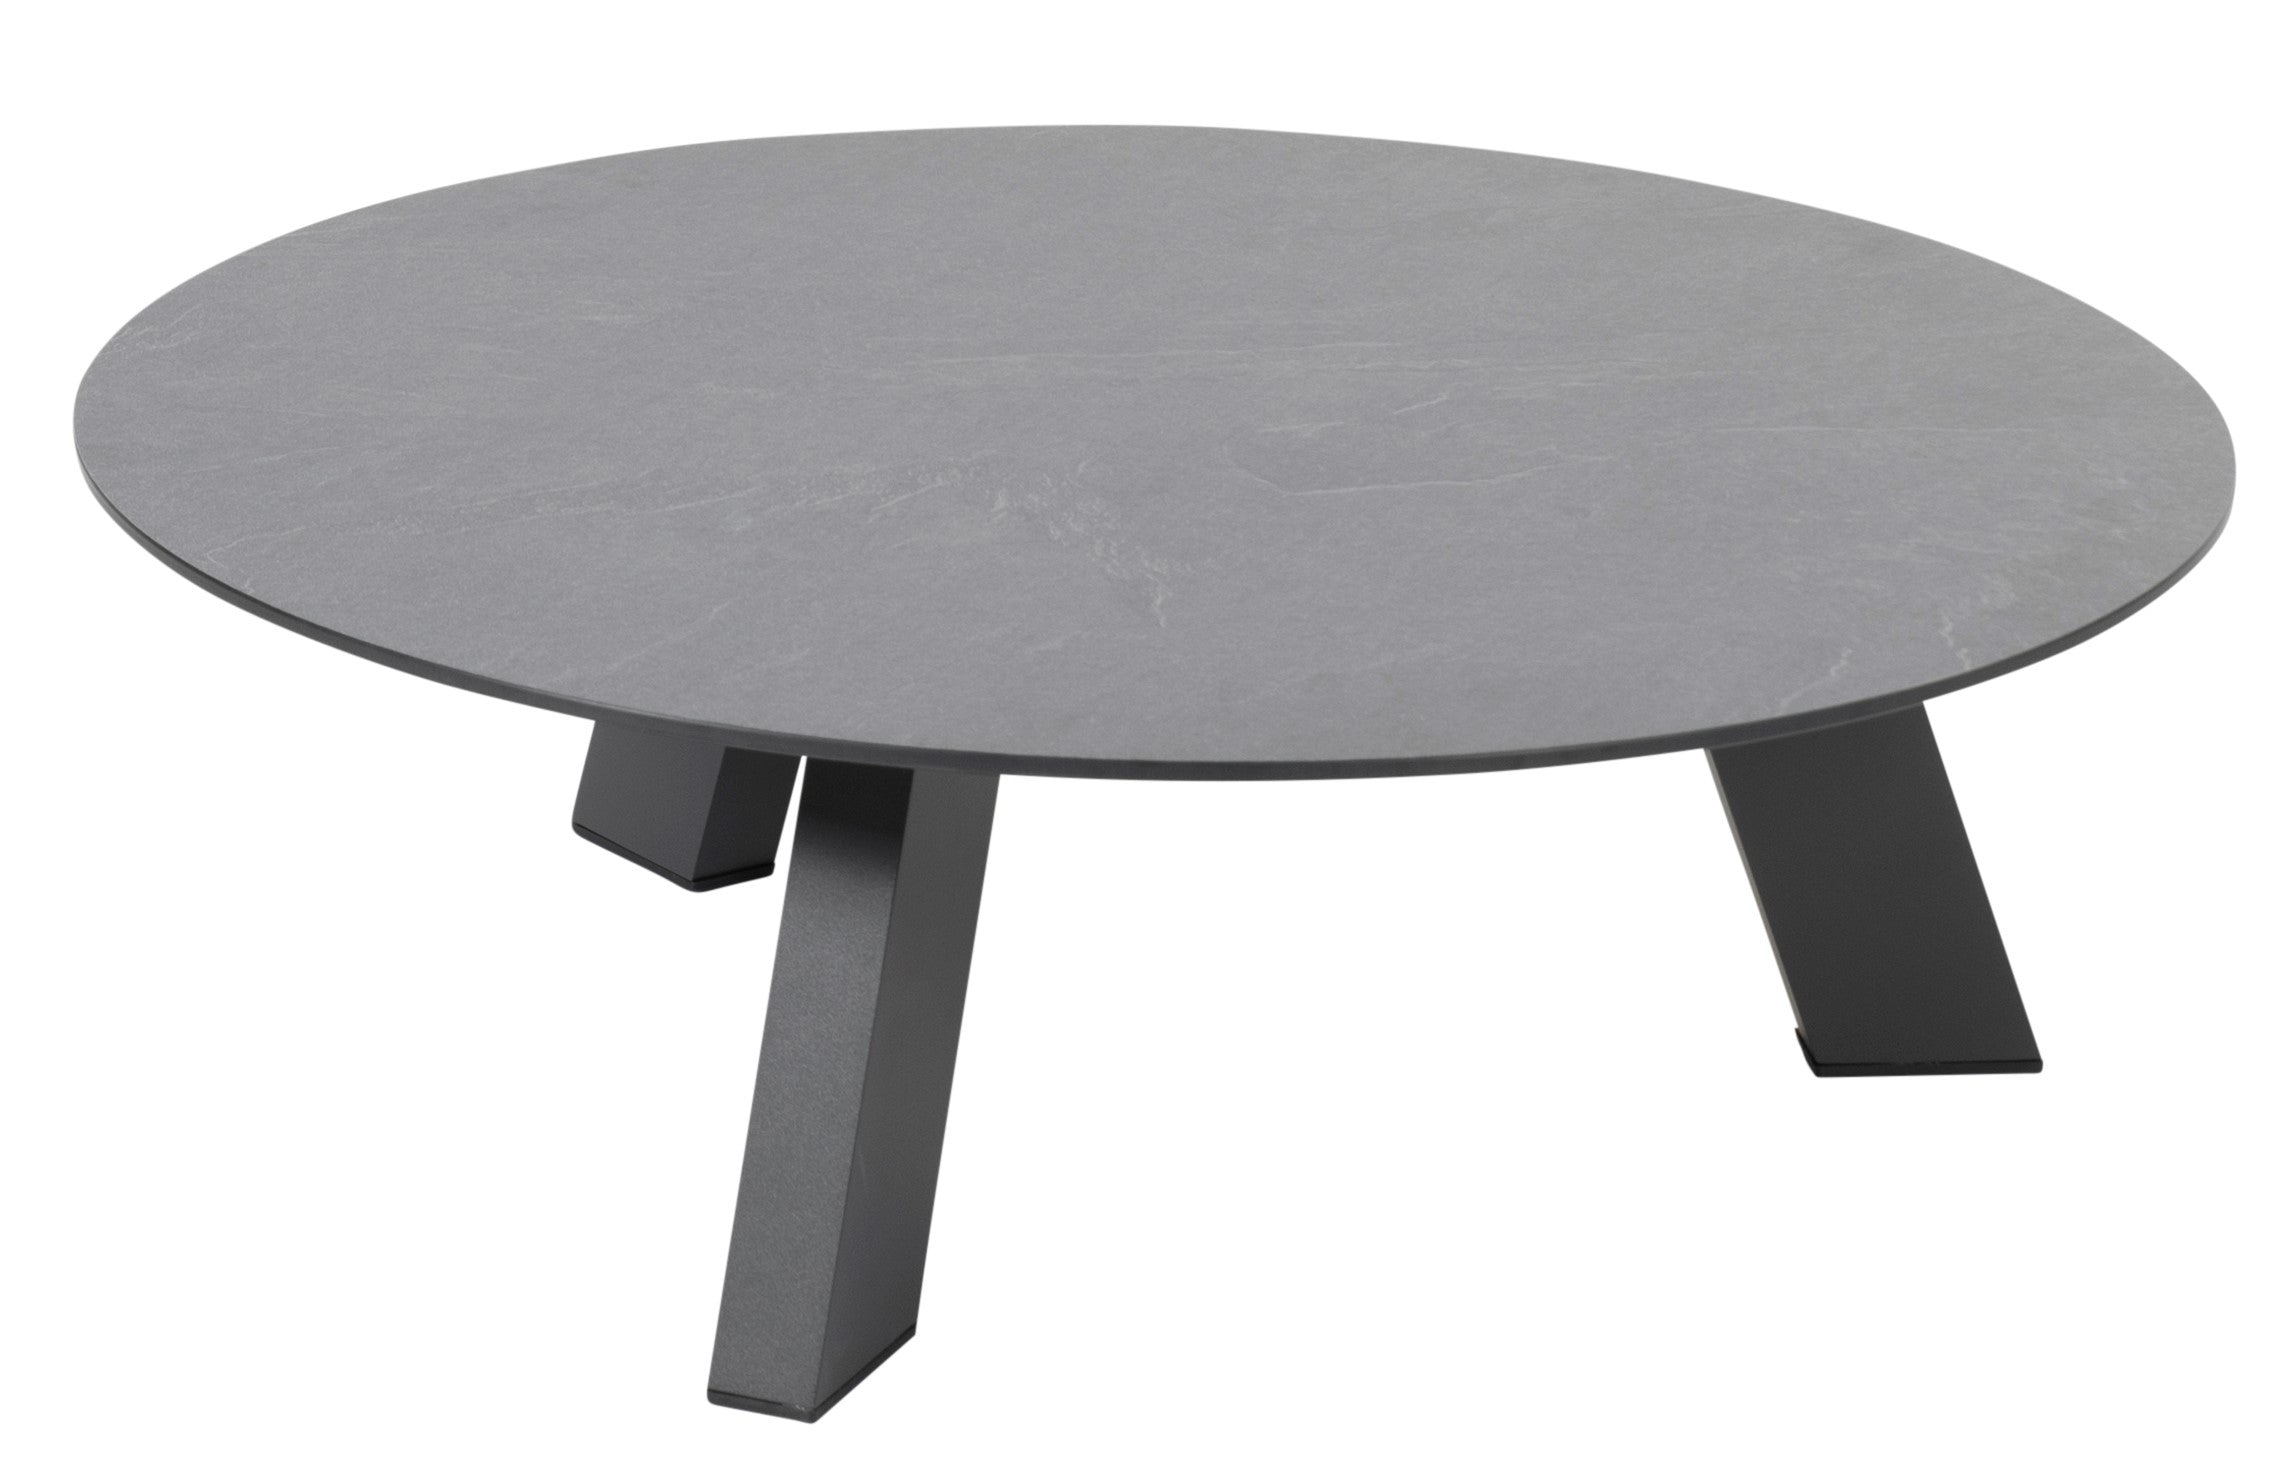 4 Seasons Outdoor Cosmic Coffee Table Round Hpl Slate Anthracite 78 X 25 Cm